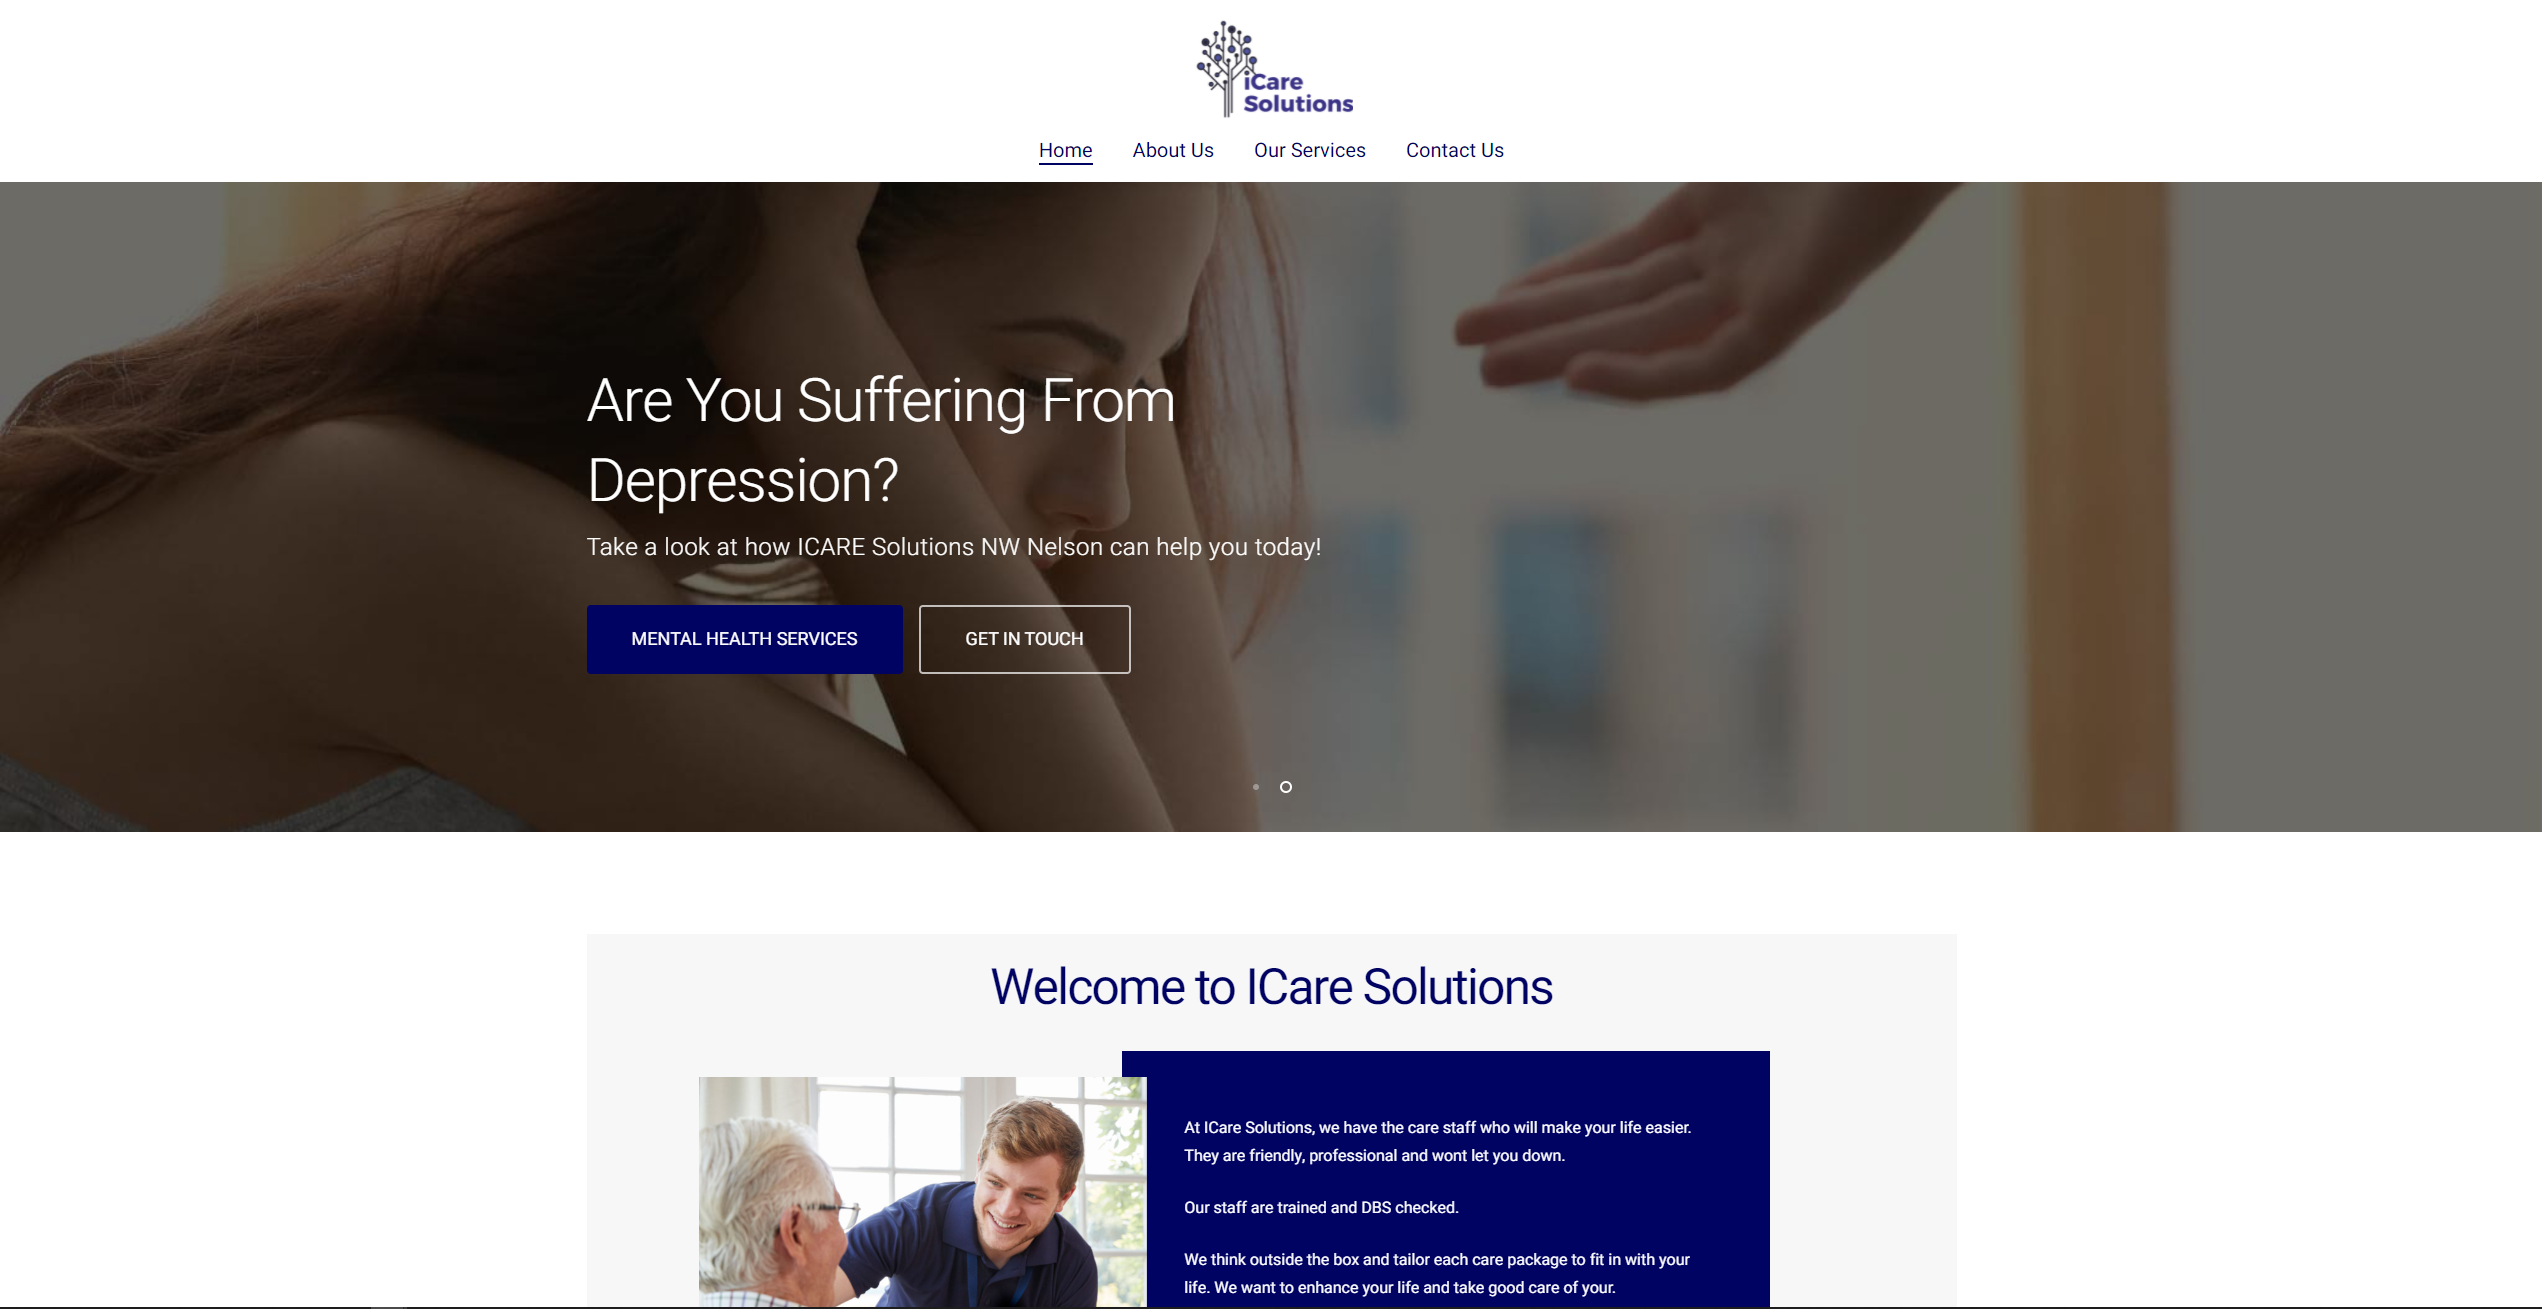 iCare solutions NW